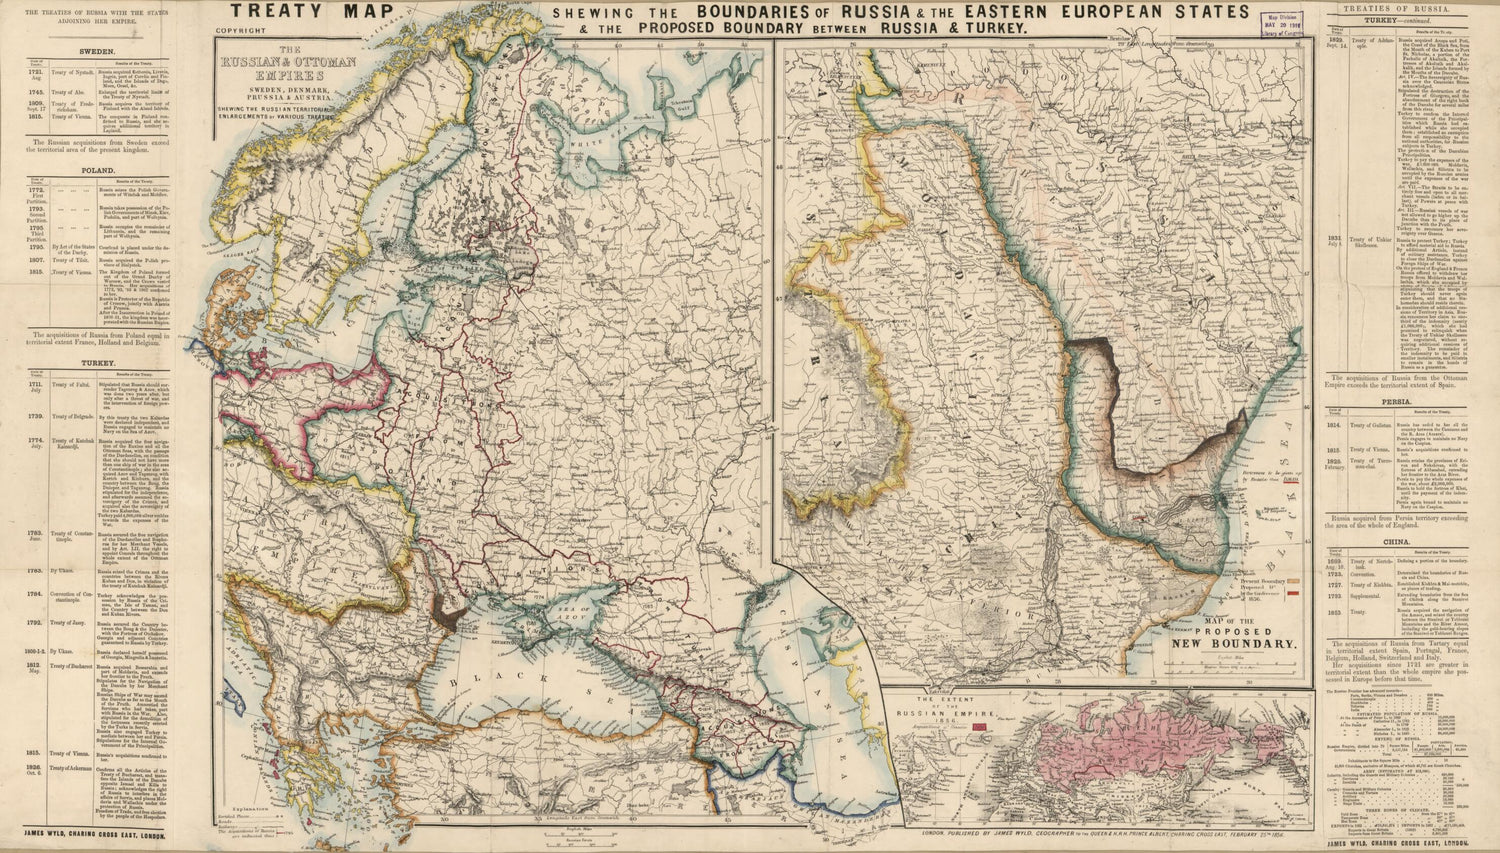 This old map of Treaty Map Shewing the Boundaries of Russia &amp; the Eastern European States : &amp; the Proposed Boundary Between Russia &amp; Turkey (Treaty Map Showing the Territorial Limits of Russia, Turkey, and the Different States of the World :) from 1856 w